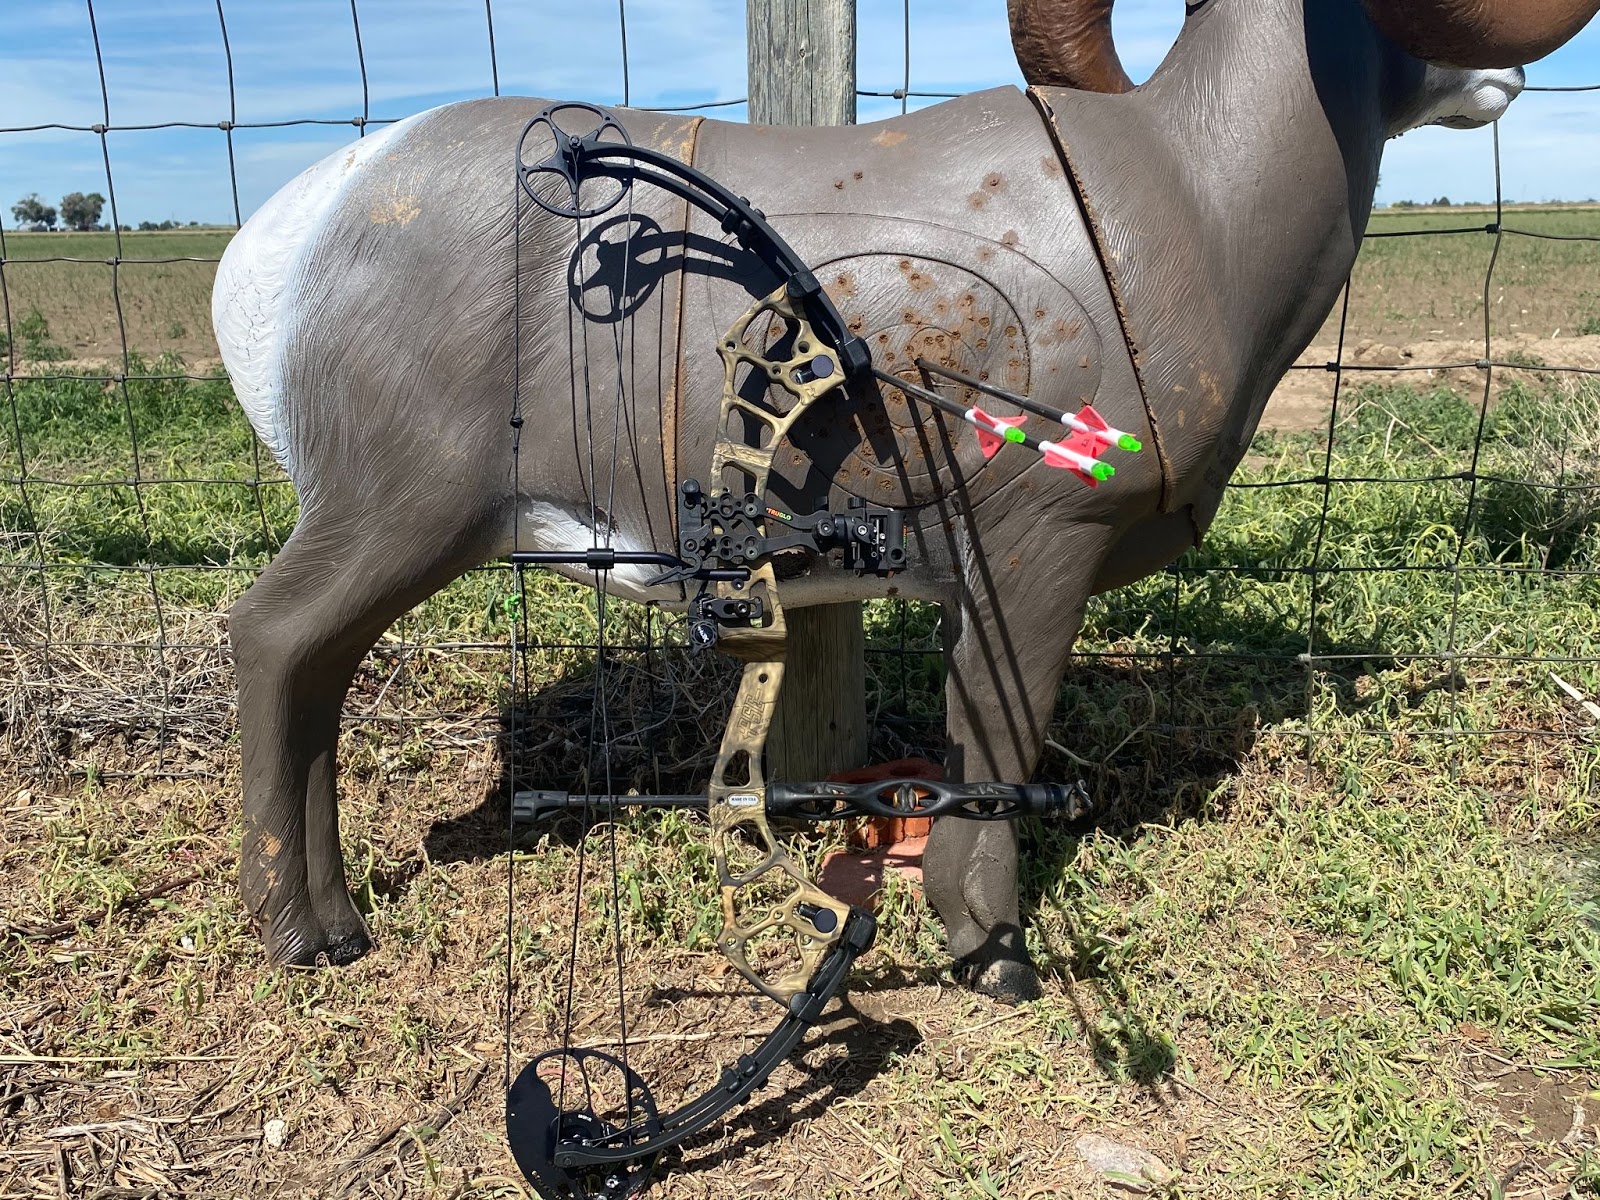 Hunting bow leaning against target with two arrows in the bullseye